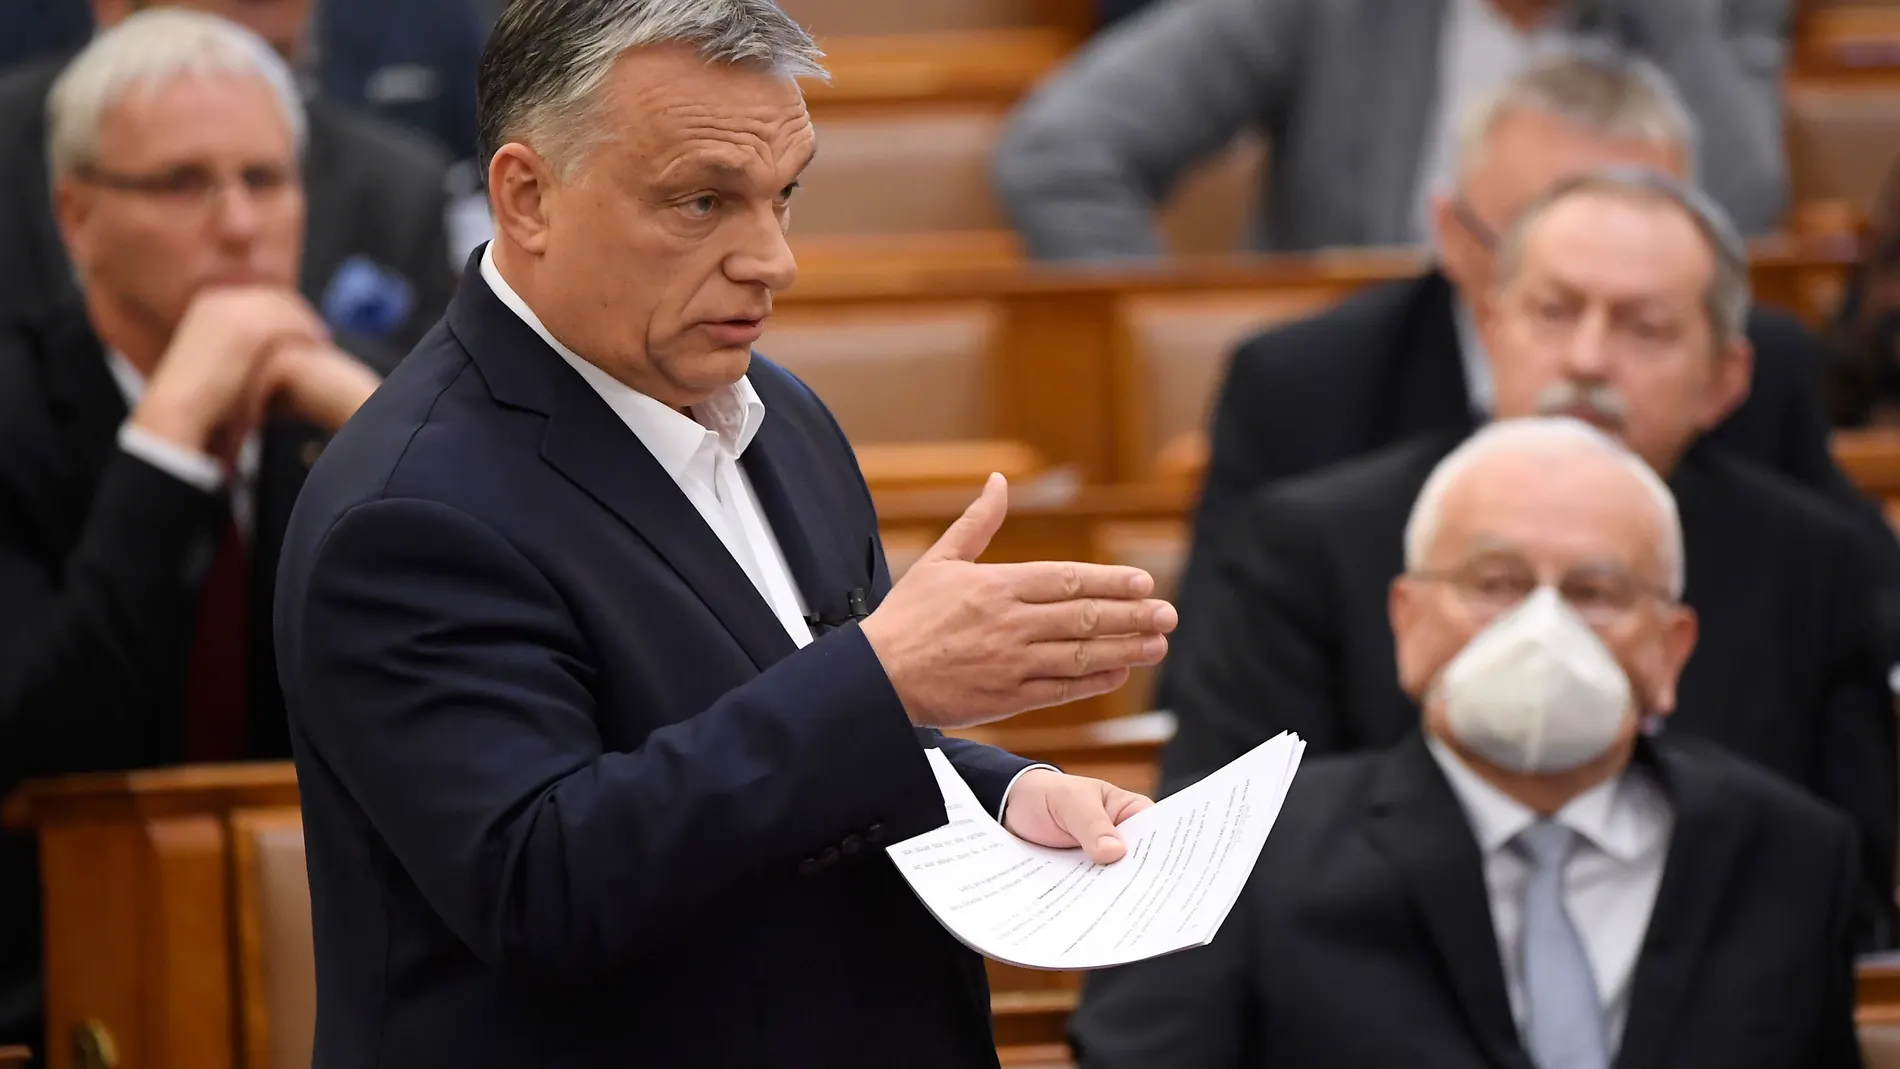 Hungarian PM Orban speaks to parliament